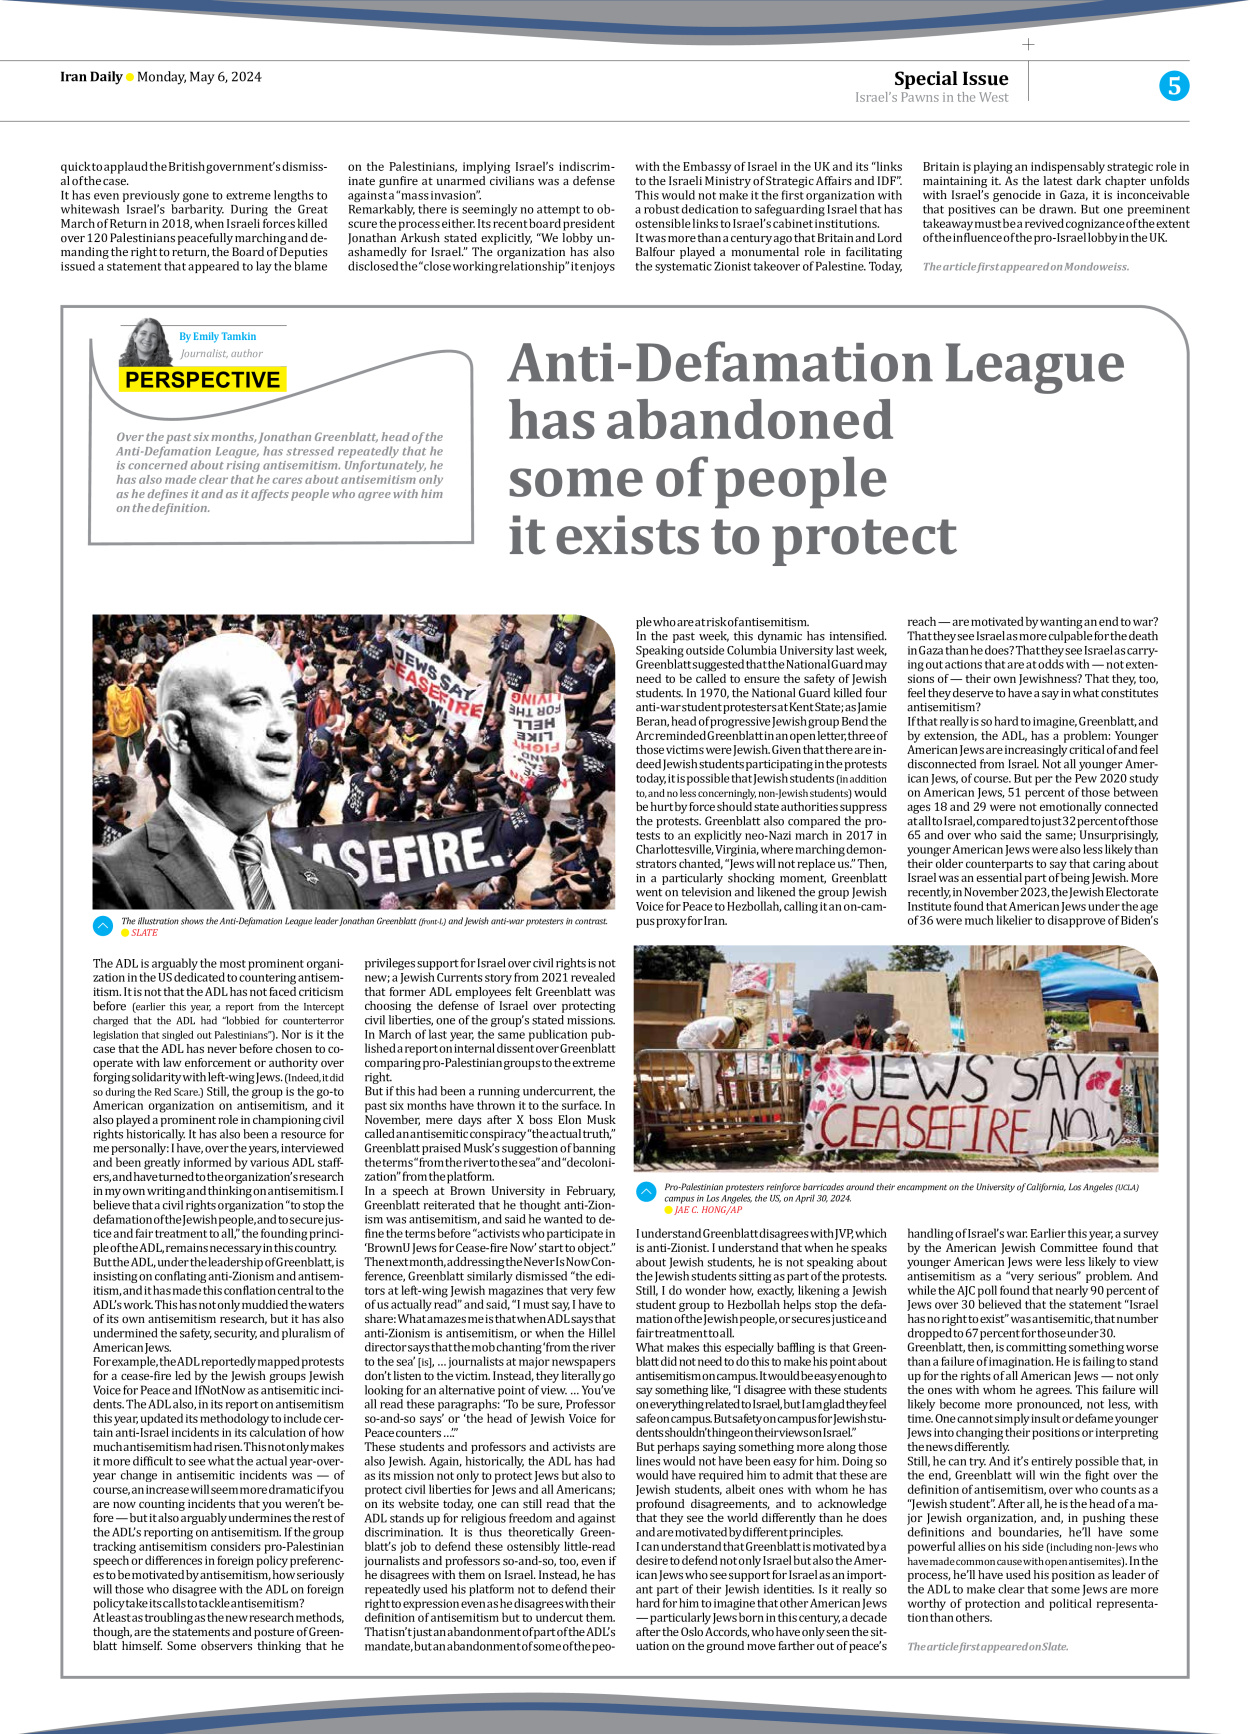 Iran Daily - Number Seven Thousand Five Hundred and Fifty - 06 May 2024 - Page 5